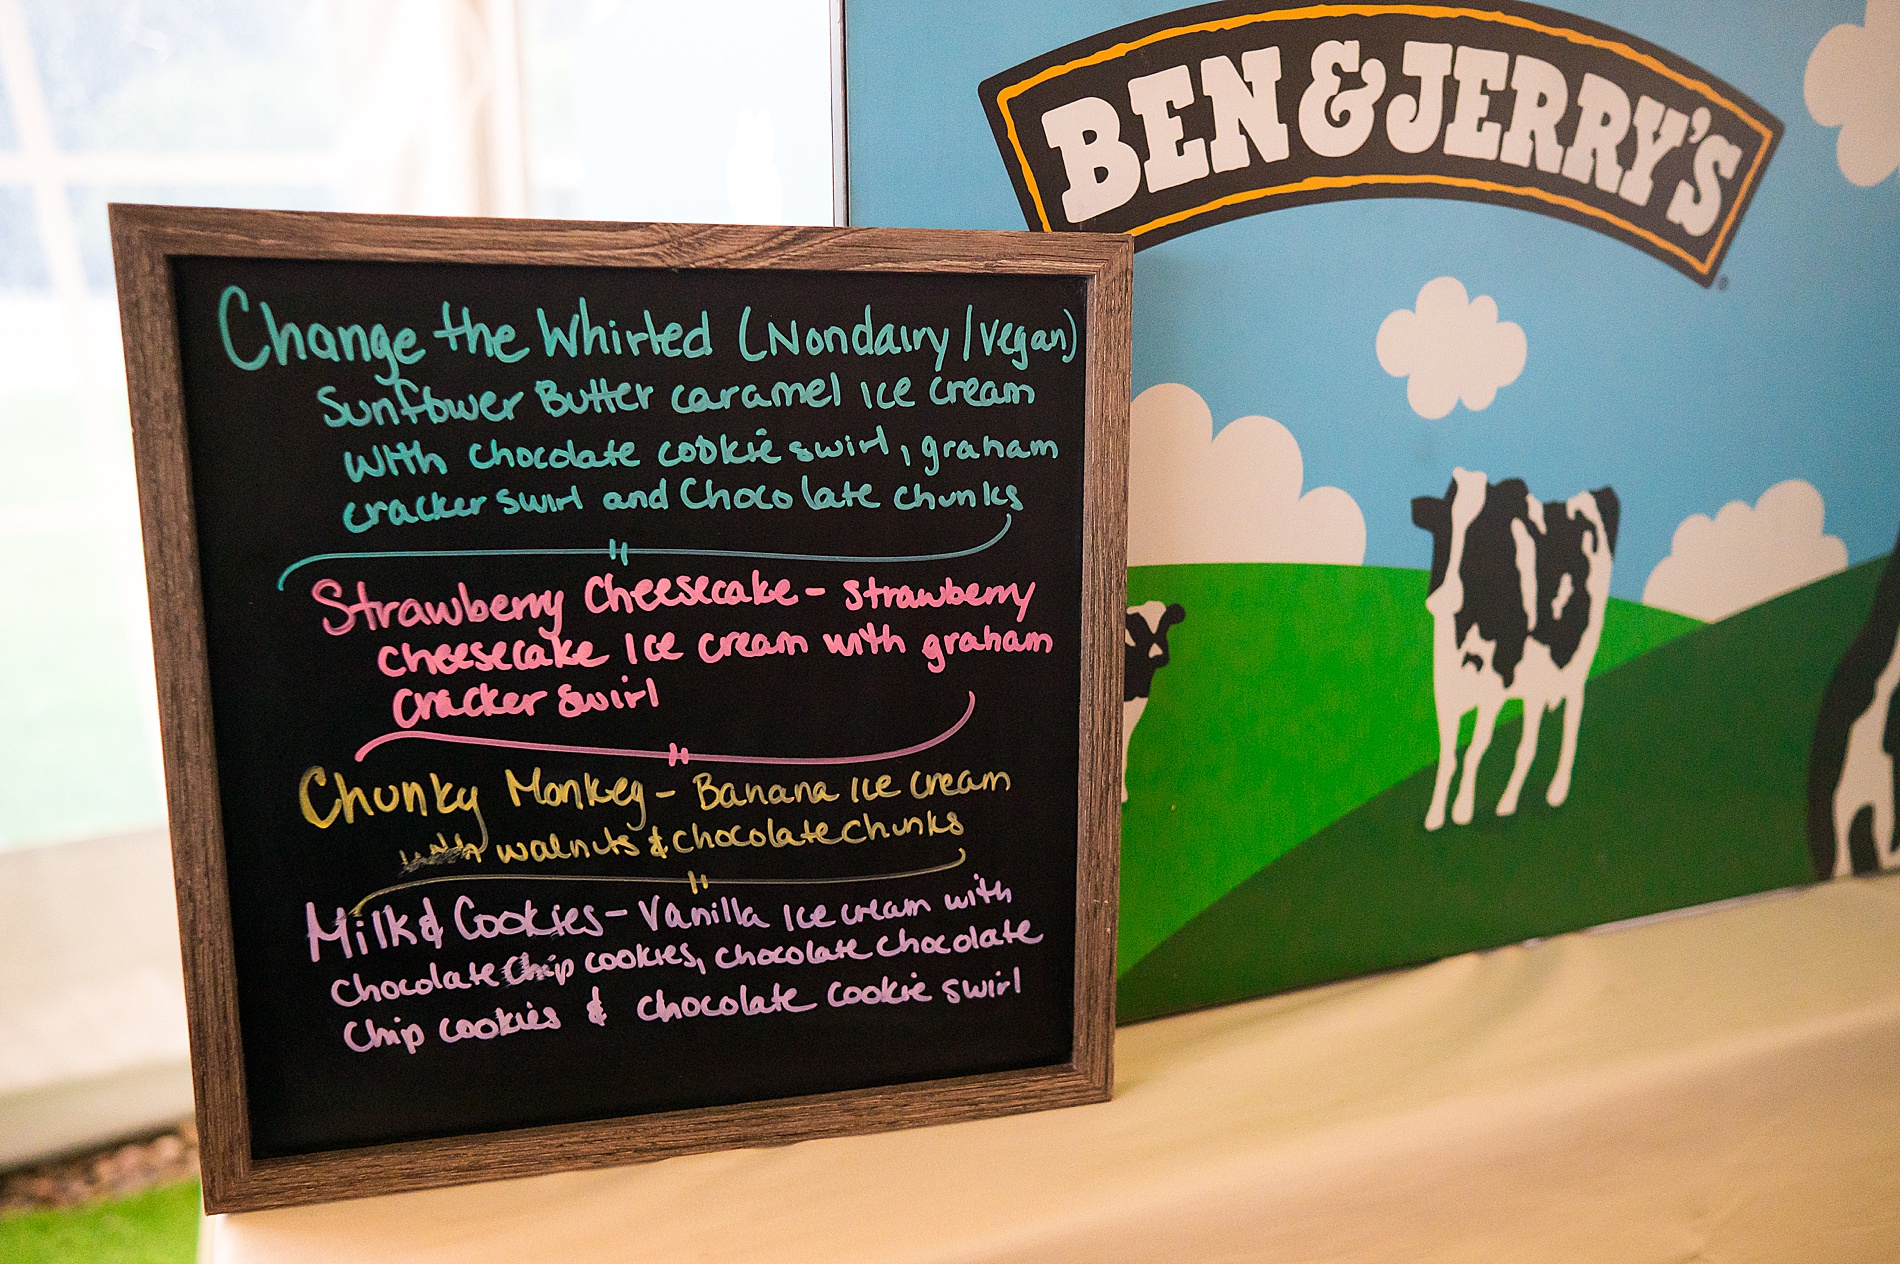 ben and jerry's ice cream from Waterfront Wedding at The Margate